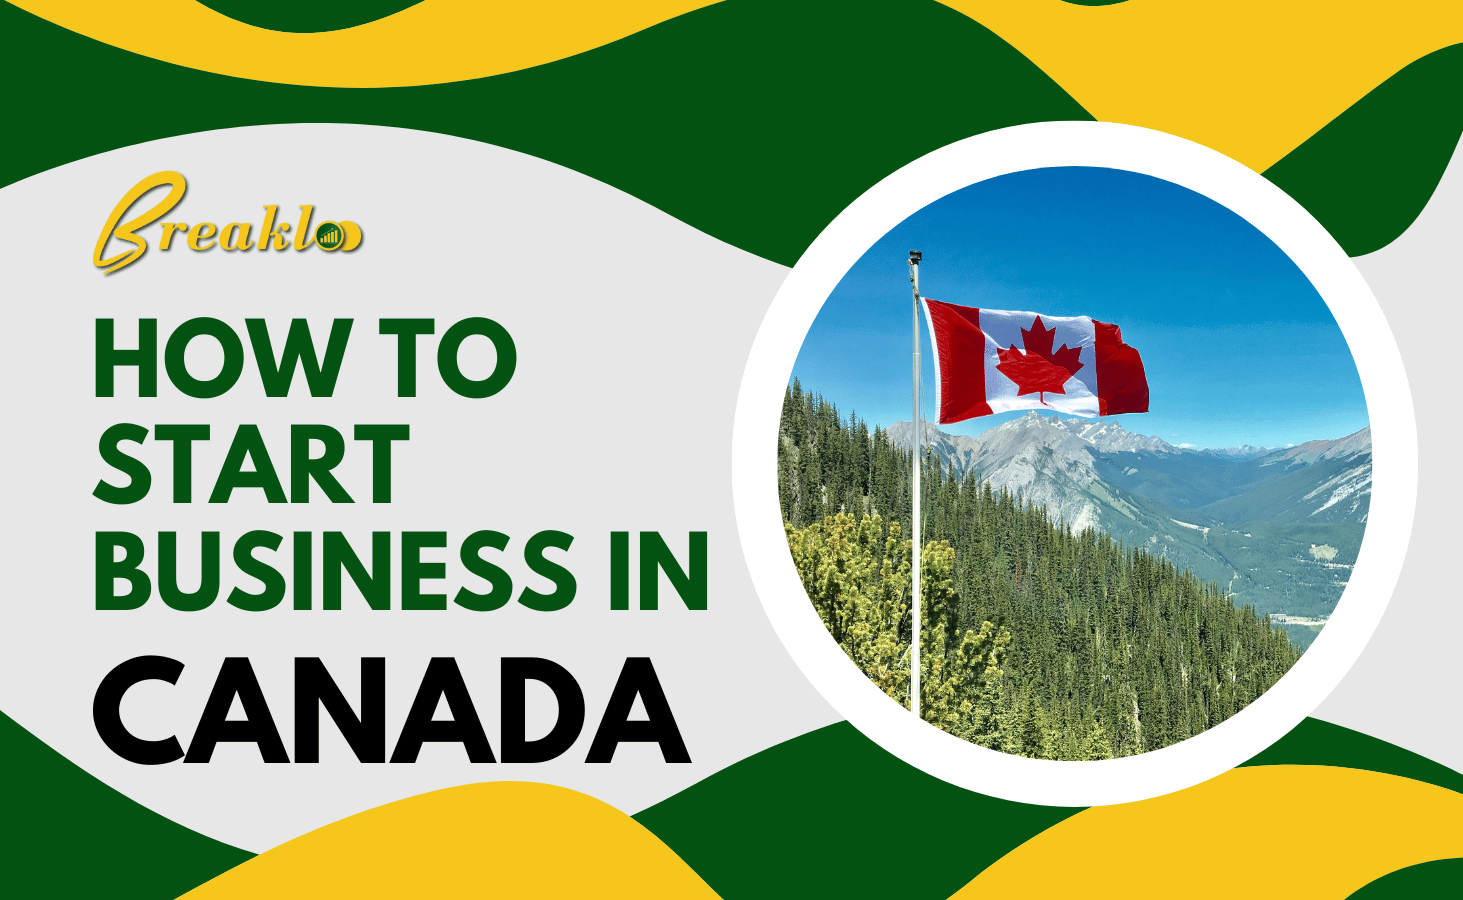 How to Start Business in Canada